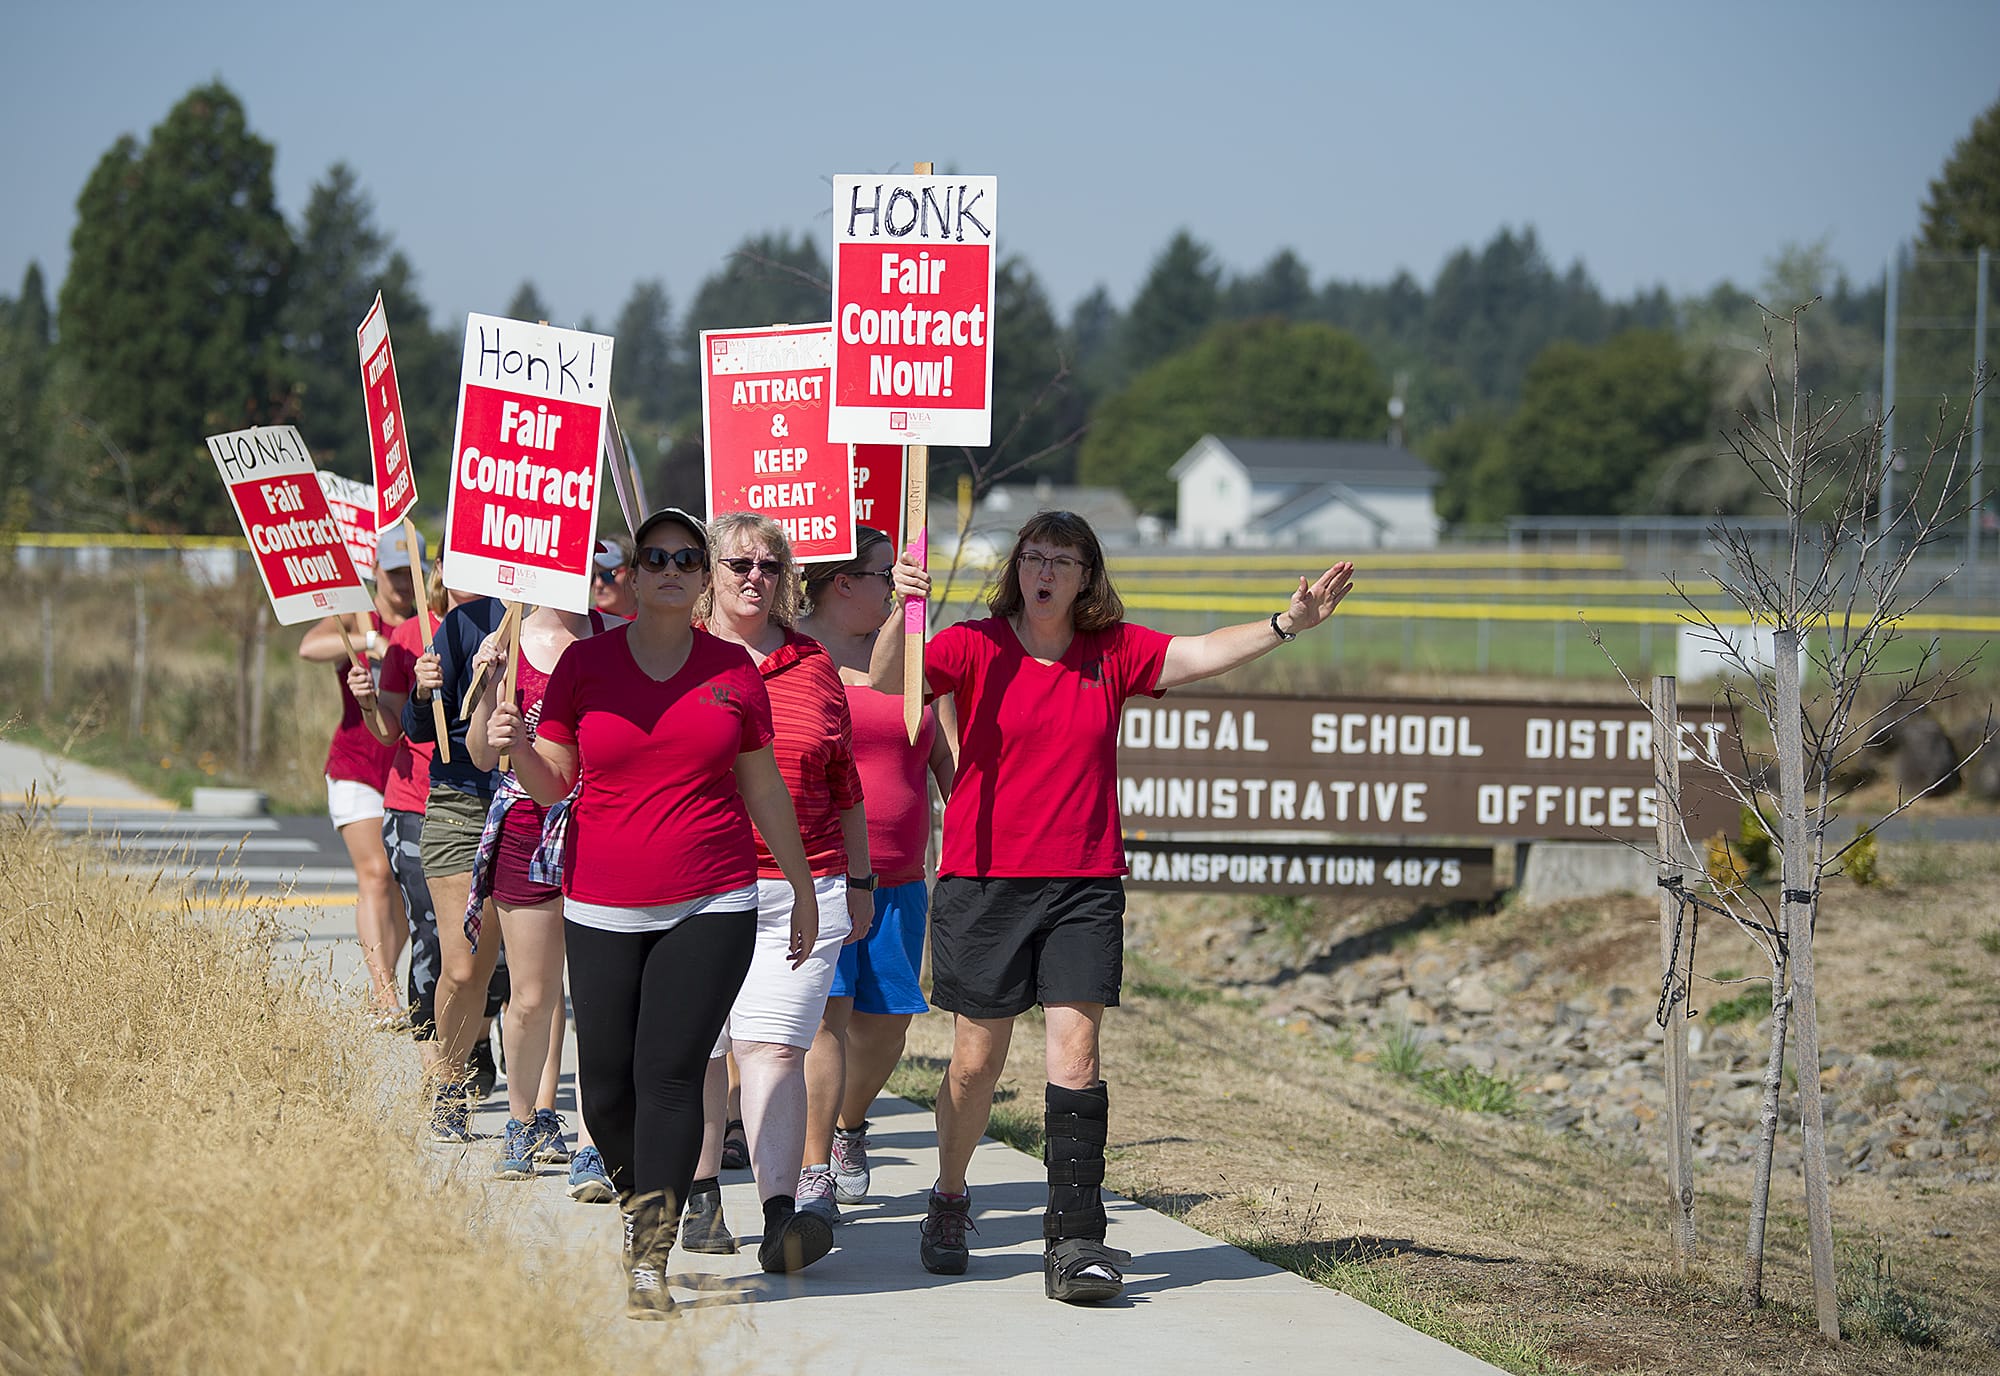 Members of the Washougal Association of Teachers join supporters in marching outside the Washougal School District Administrative Offices on Wednesday afternoon. Shortly after 6 p.m., the Washougal School District announced it had reached a tentative agreement with the teachers union to end a strike that started Aug. 28.